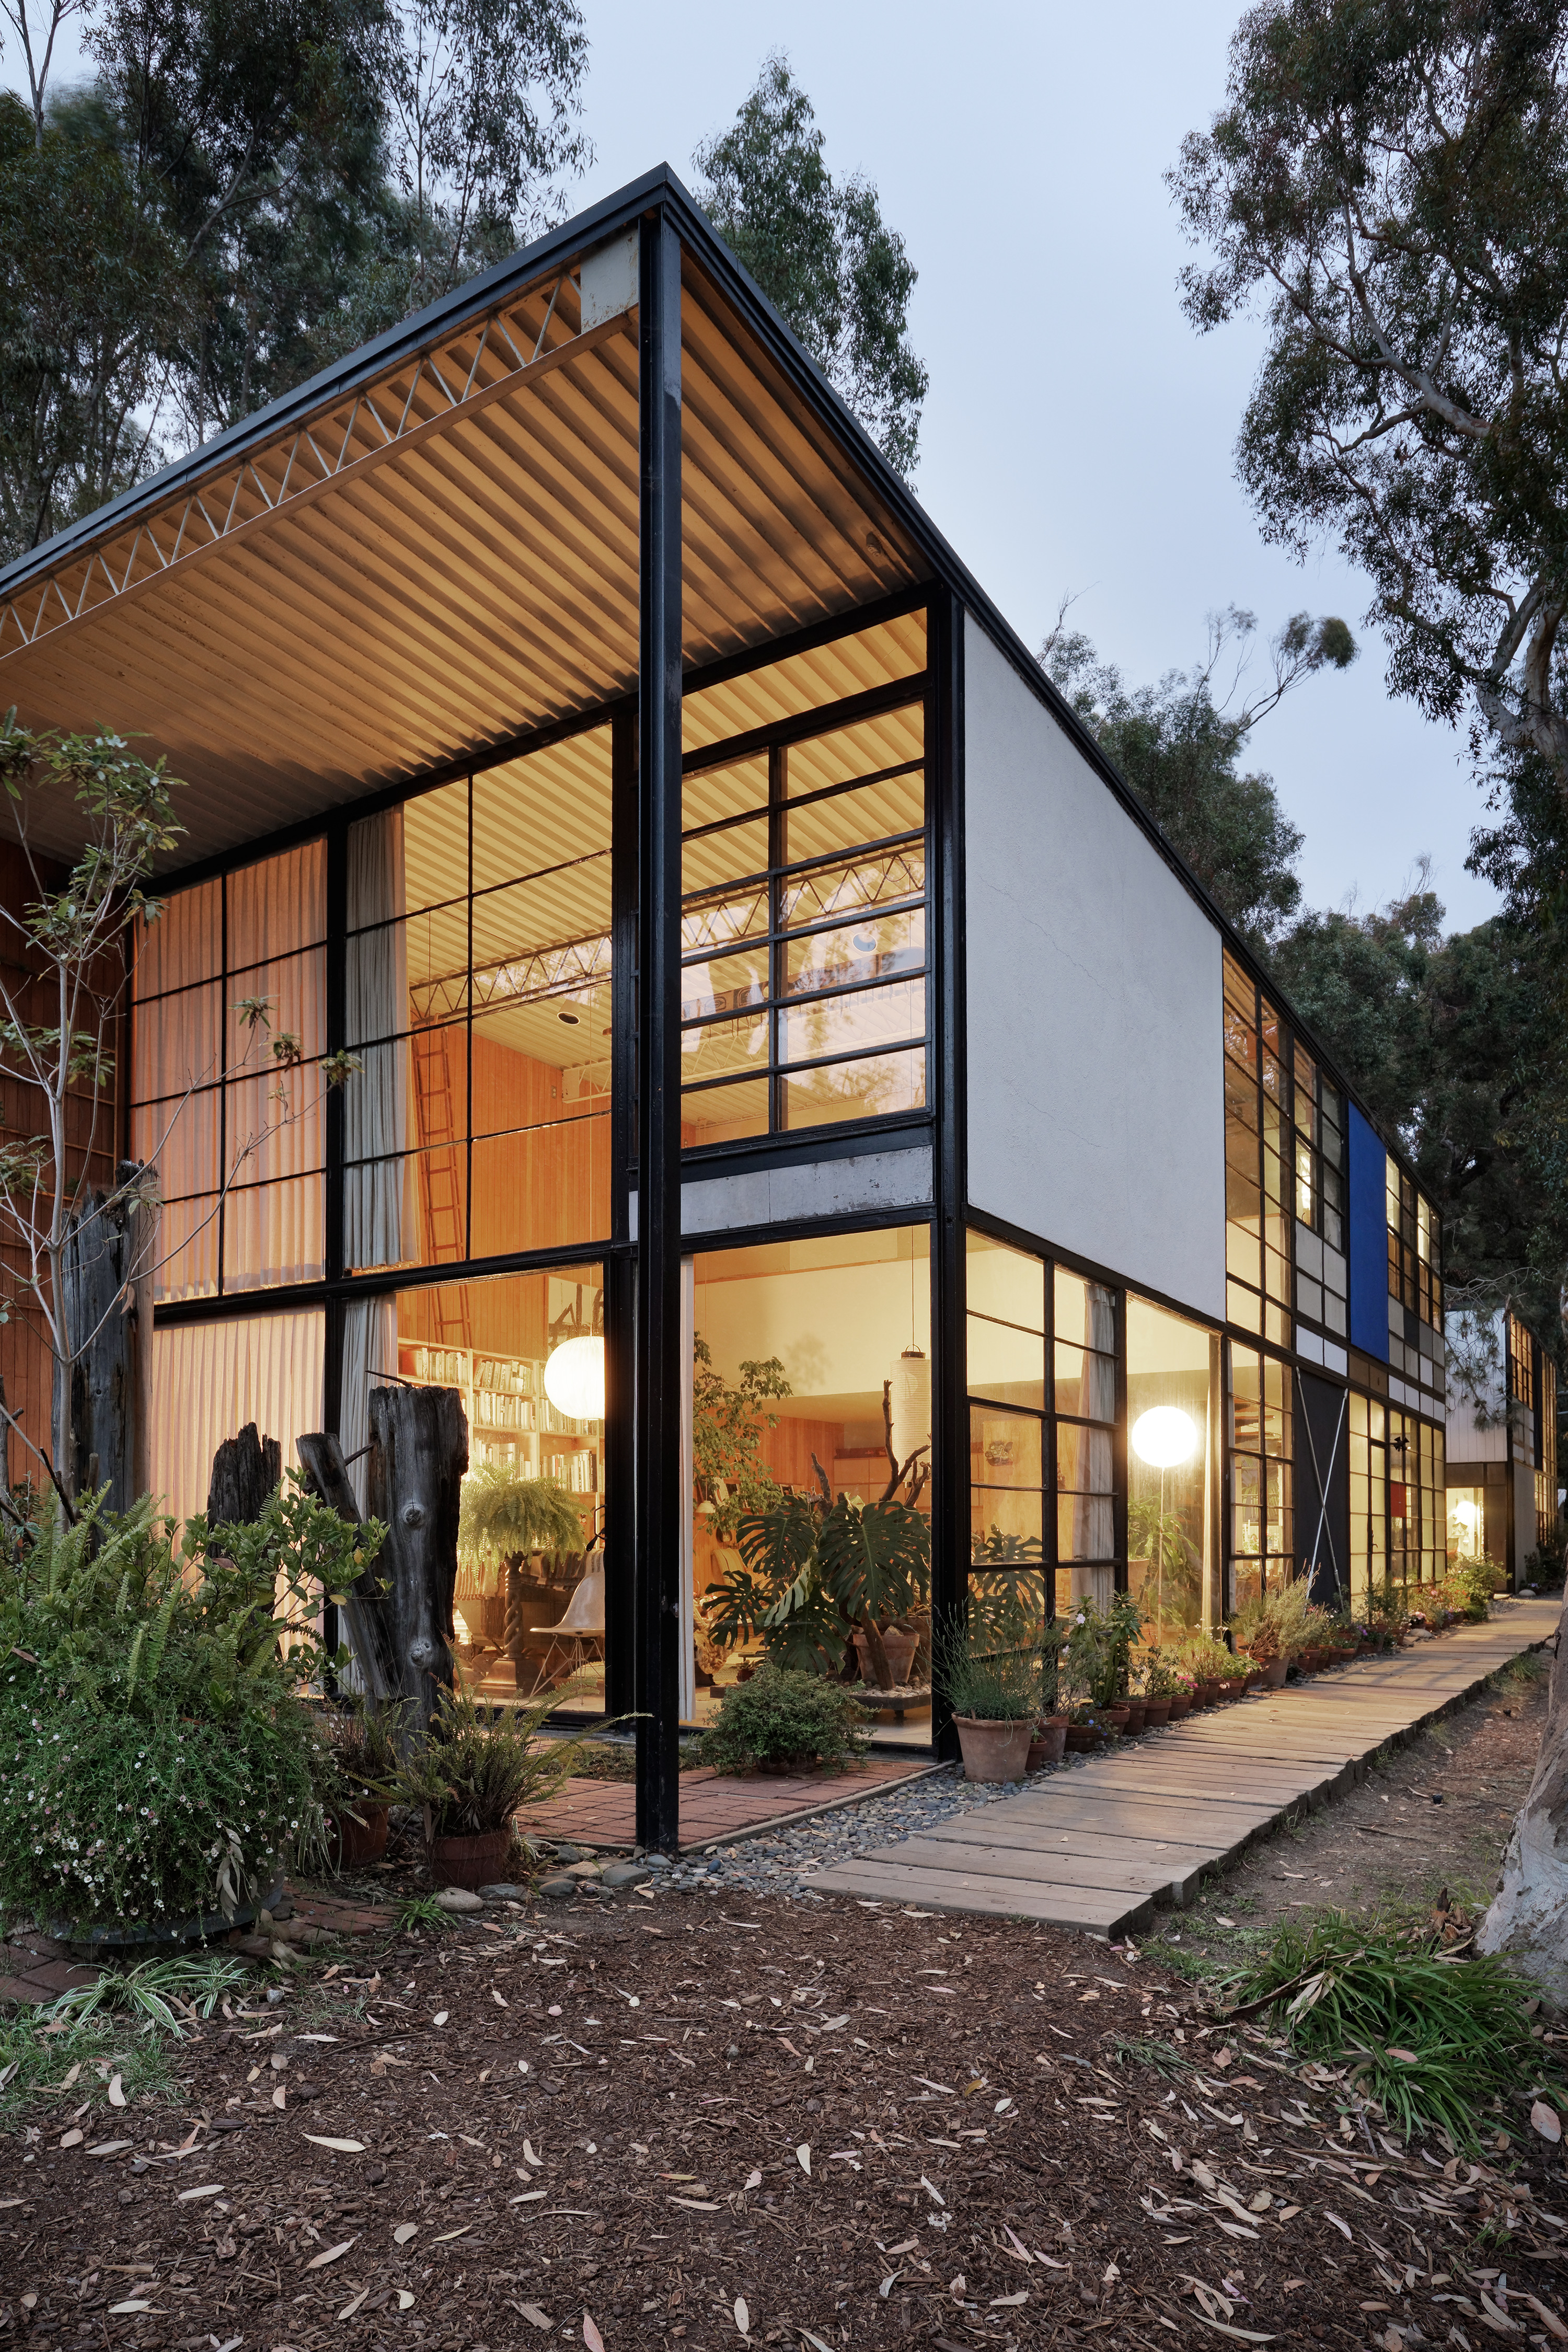 A view of the Eames House.